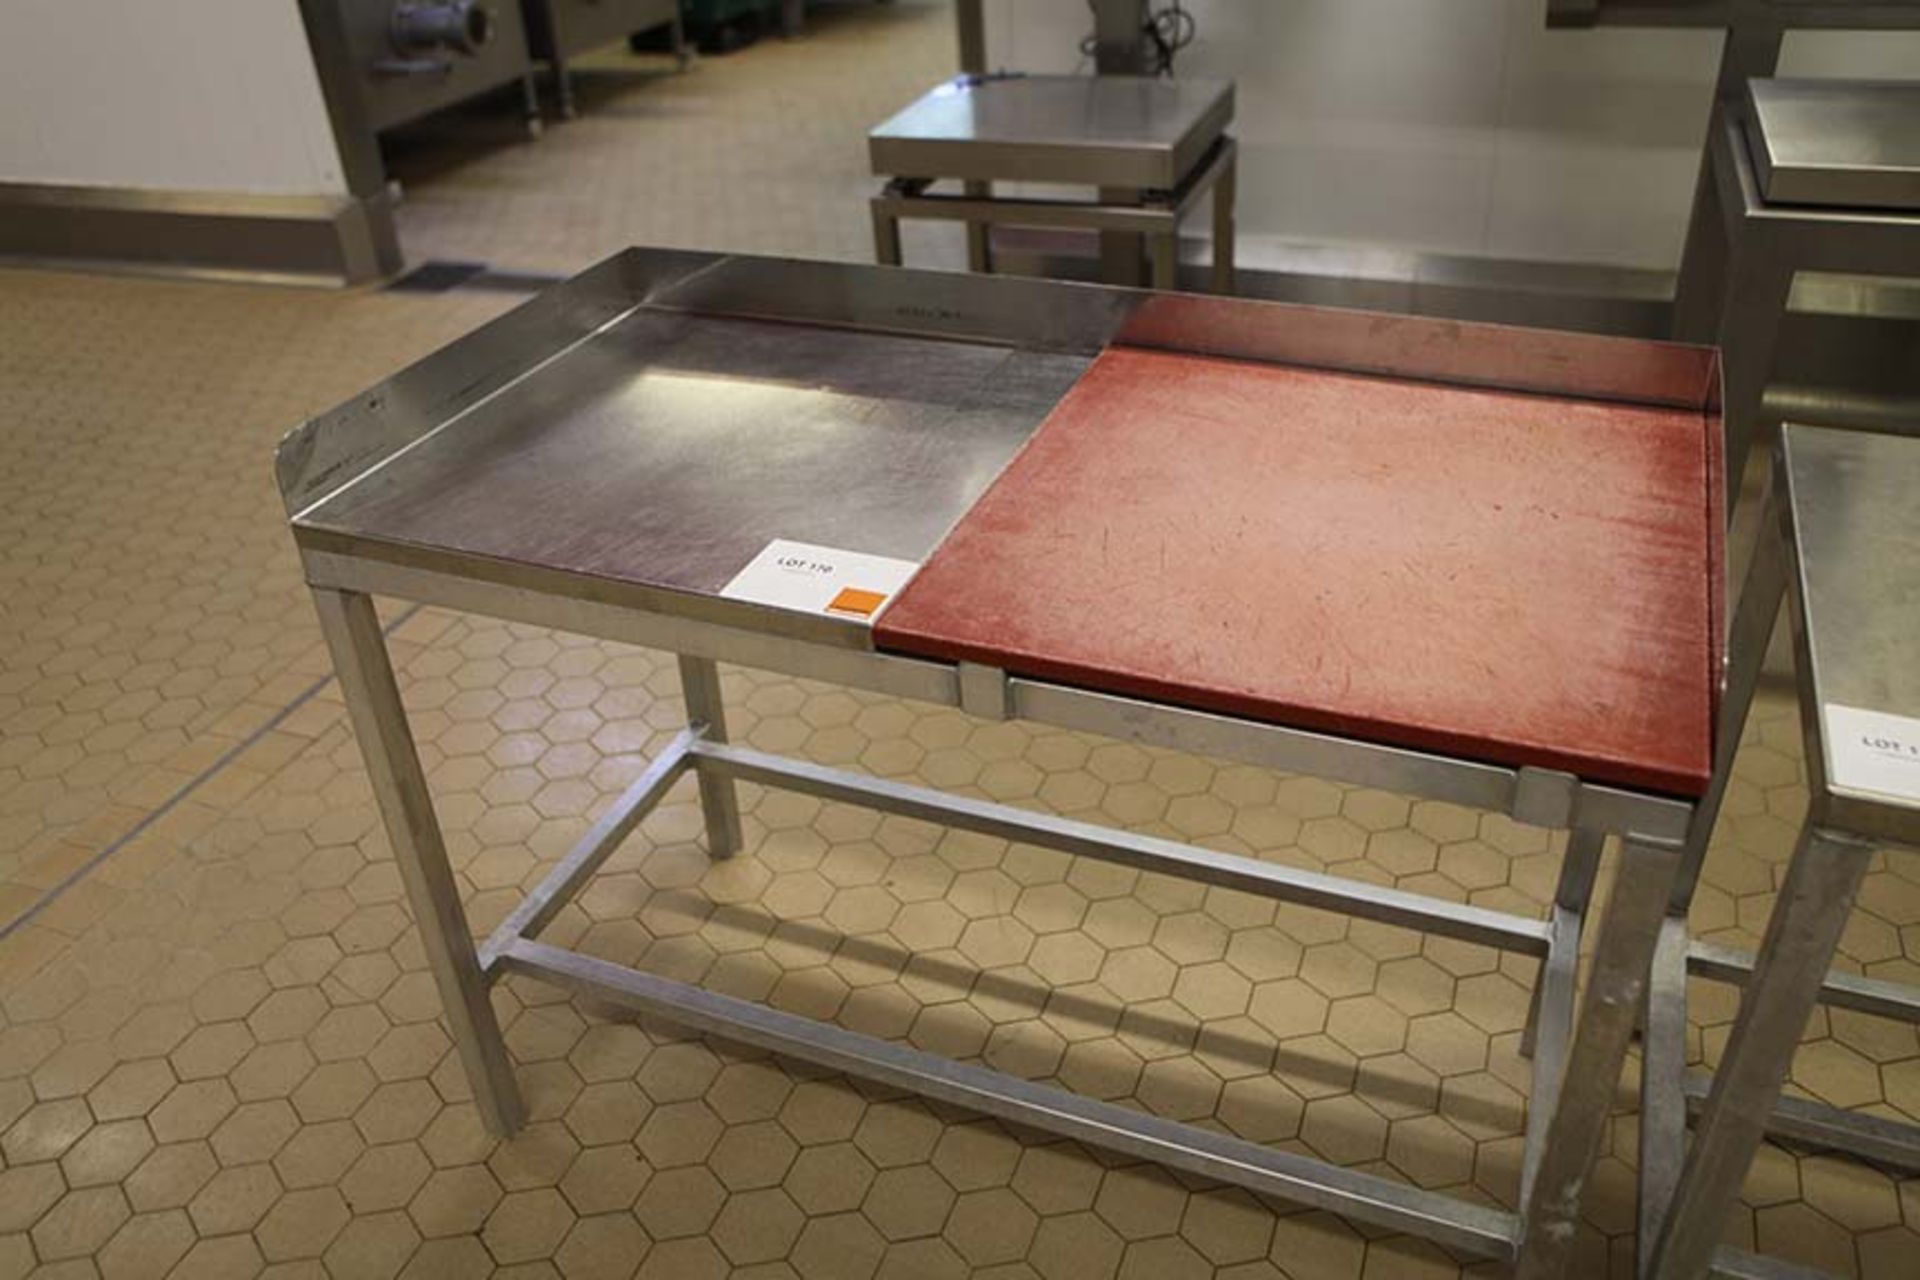 Meat preparation table 50/50 stainless and polyprop tops